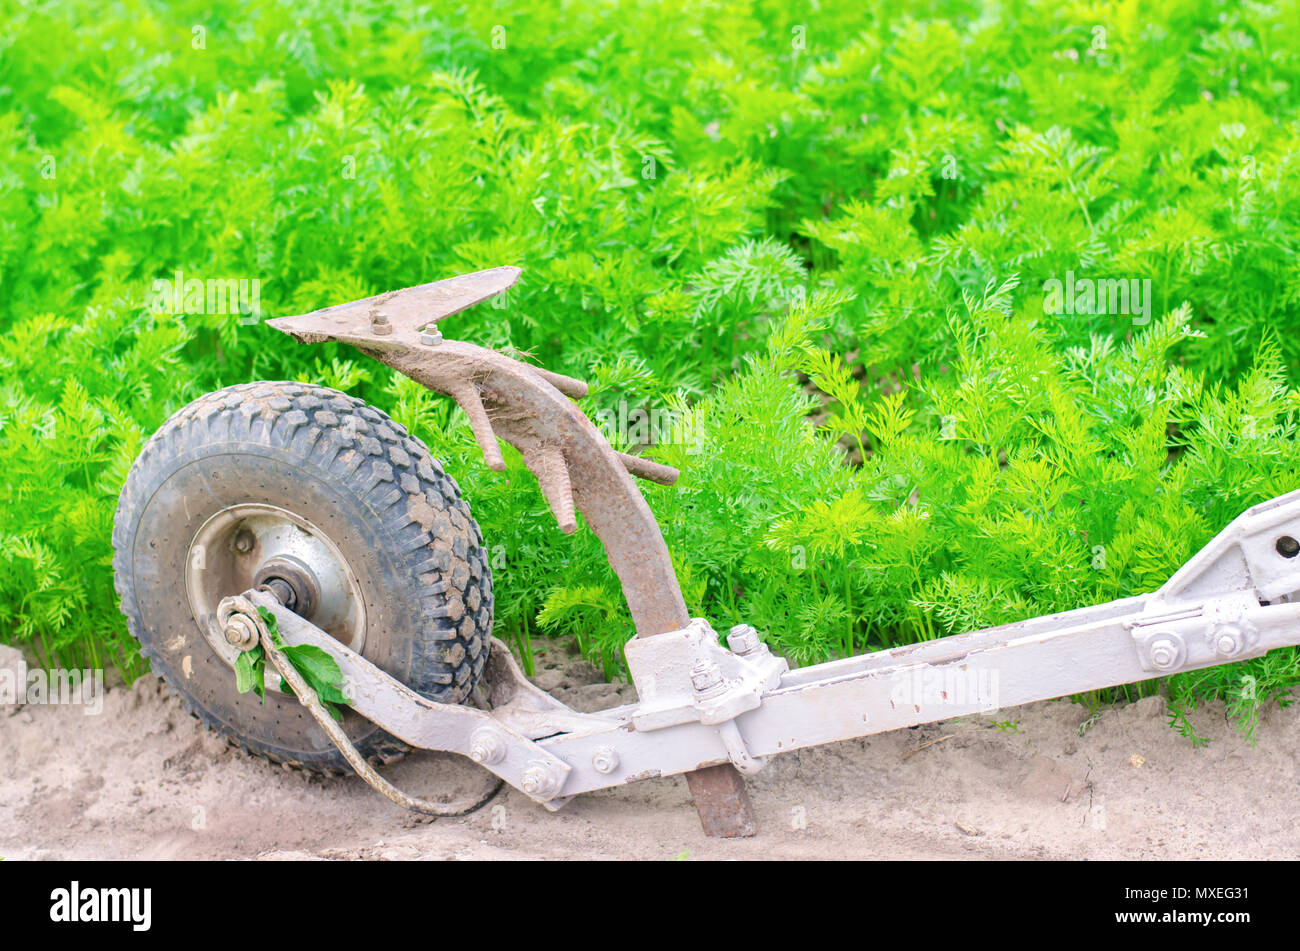 A manual plow on an electric winch. Cultivator. Agricultural tools,  farming. Agriculture. Plowing the ground before planting, cultivating  plants, harv Stock Photo - Alamy